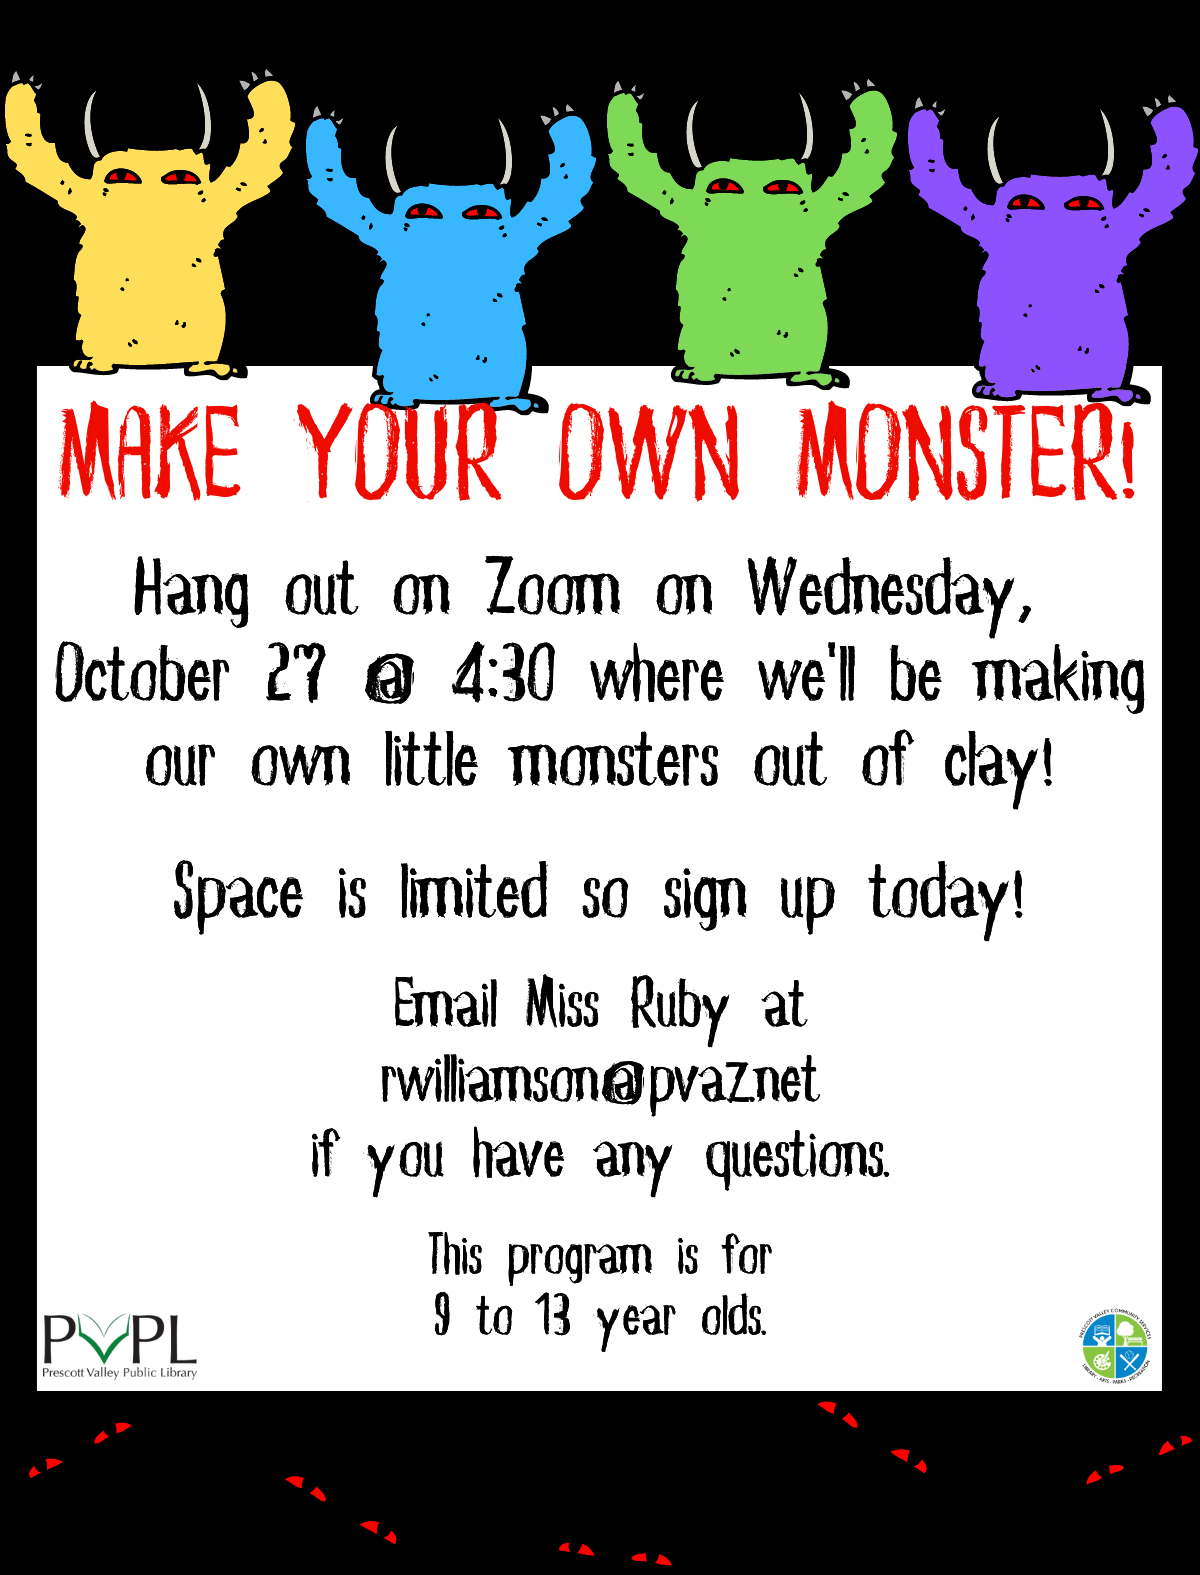 Make Your Own Monster! Join us on Zoom on Oct 27 @ 4:30pm to make a monster out of clay!